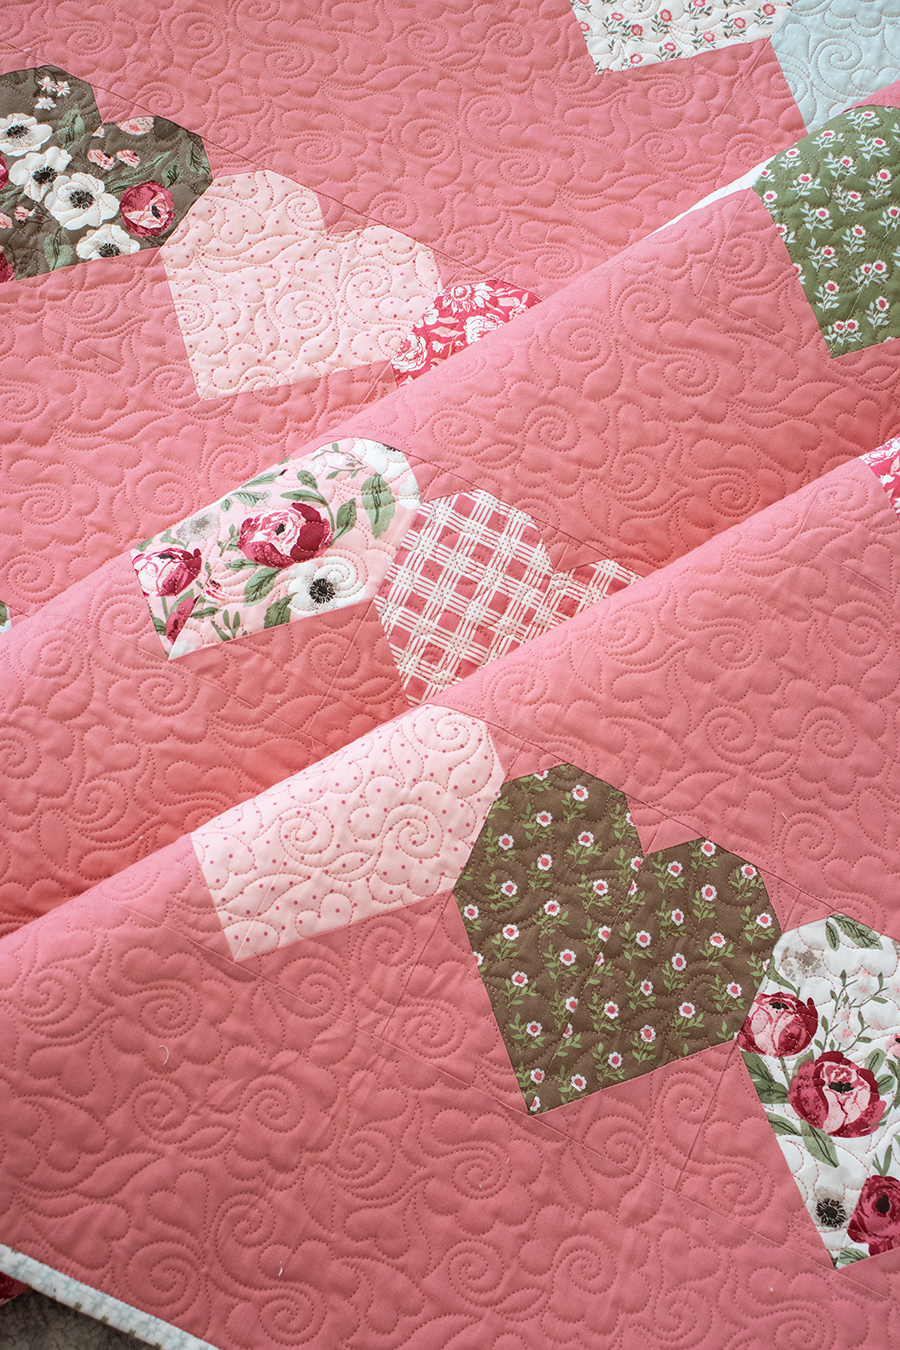 "Love Day" heart quilt by Lella Boutique. Fat quarter or fat eighth friendly. Fabric is Lovestruck by Lella Boutique for Moda. Download the PDF here.